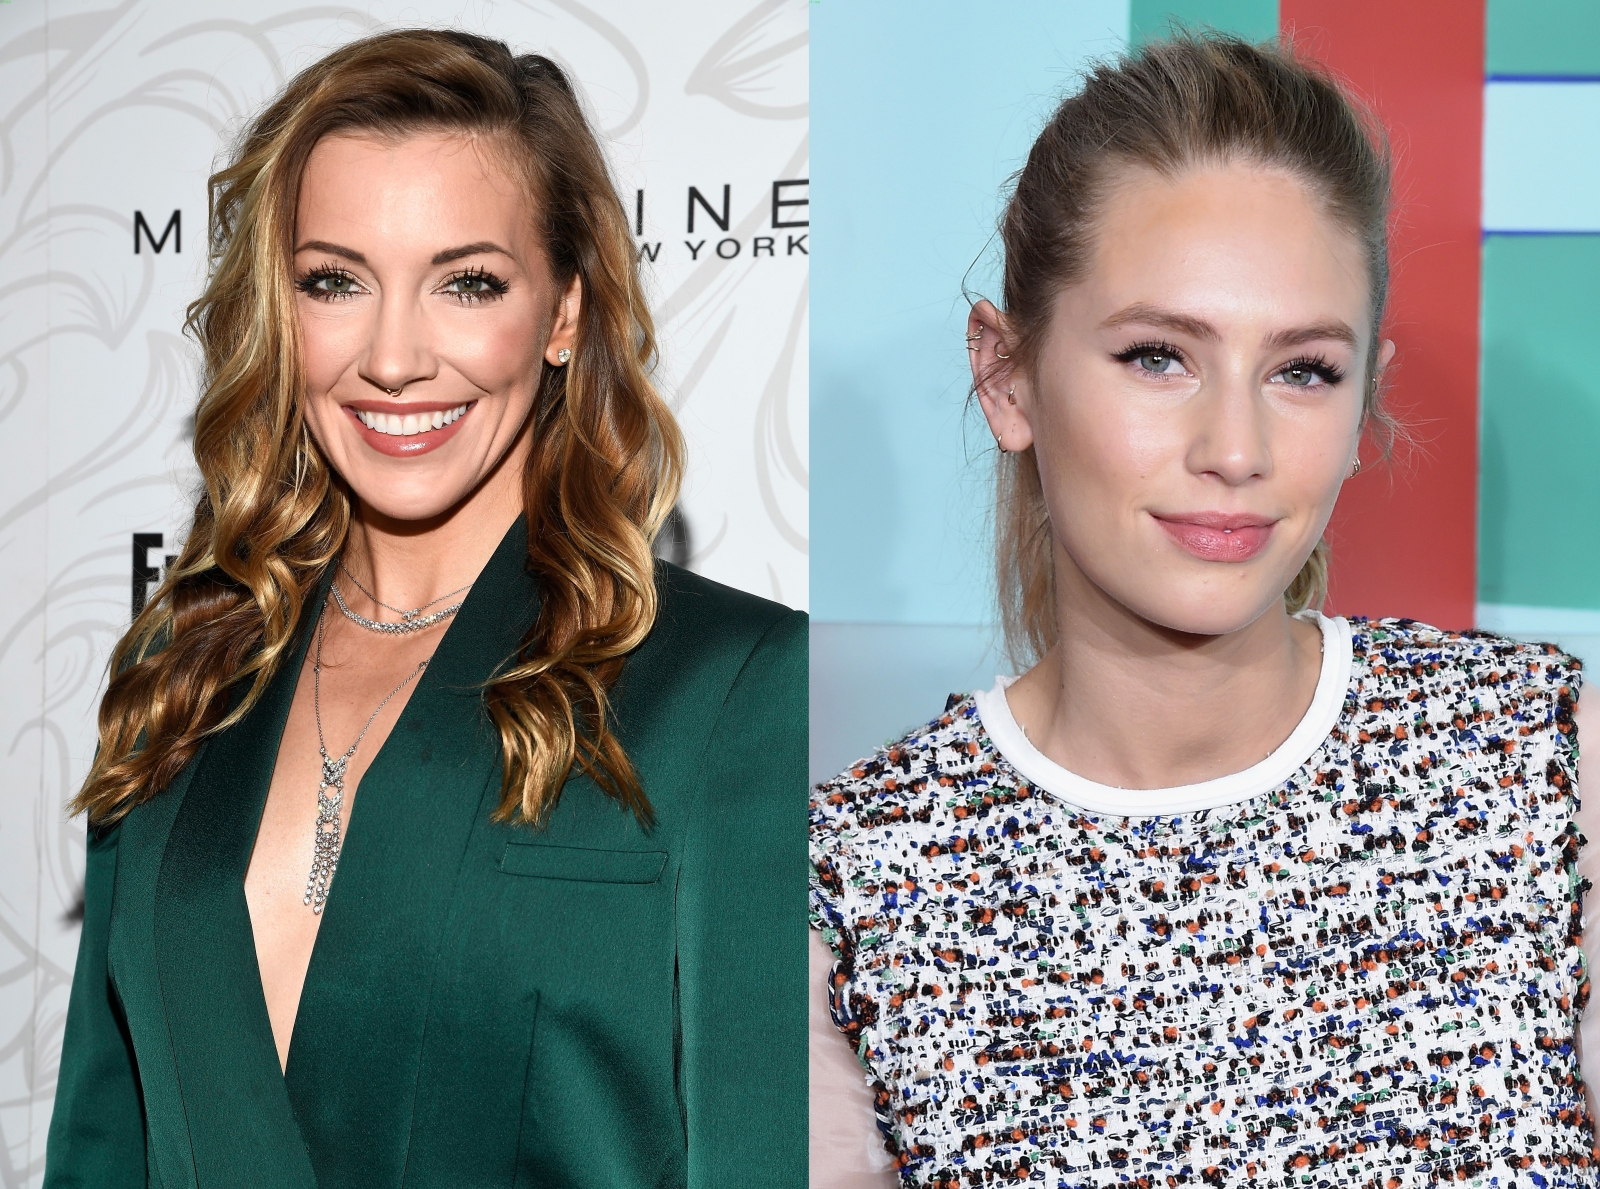 Fappening 2.0: Nude photos of Arrow star Katie Cassidy and Dylan Penn alleg...